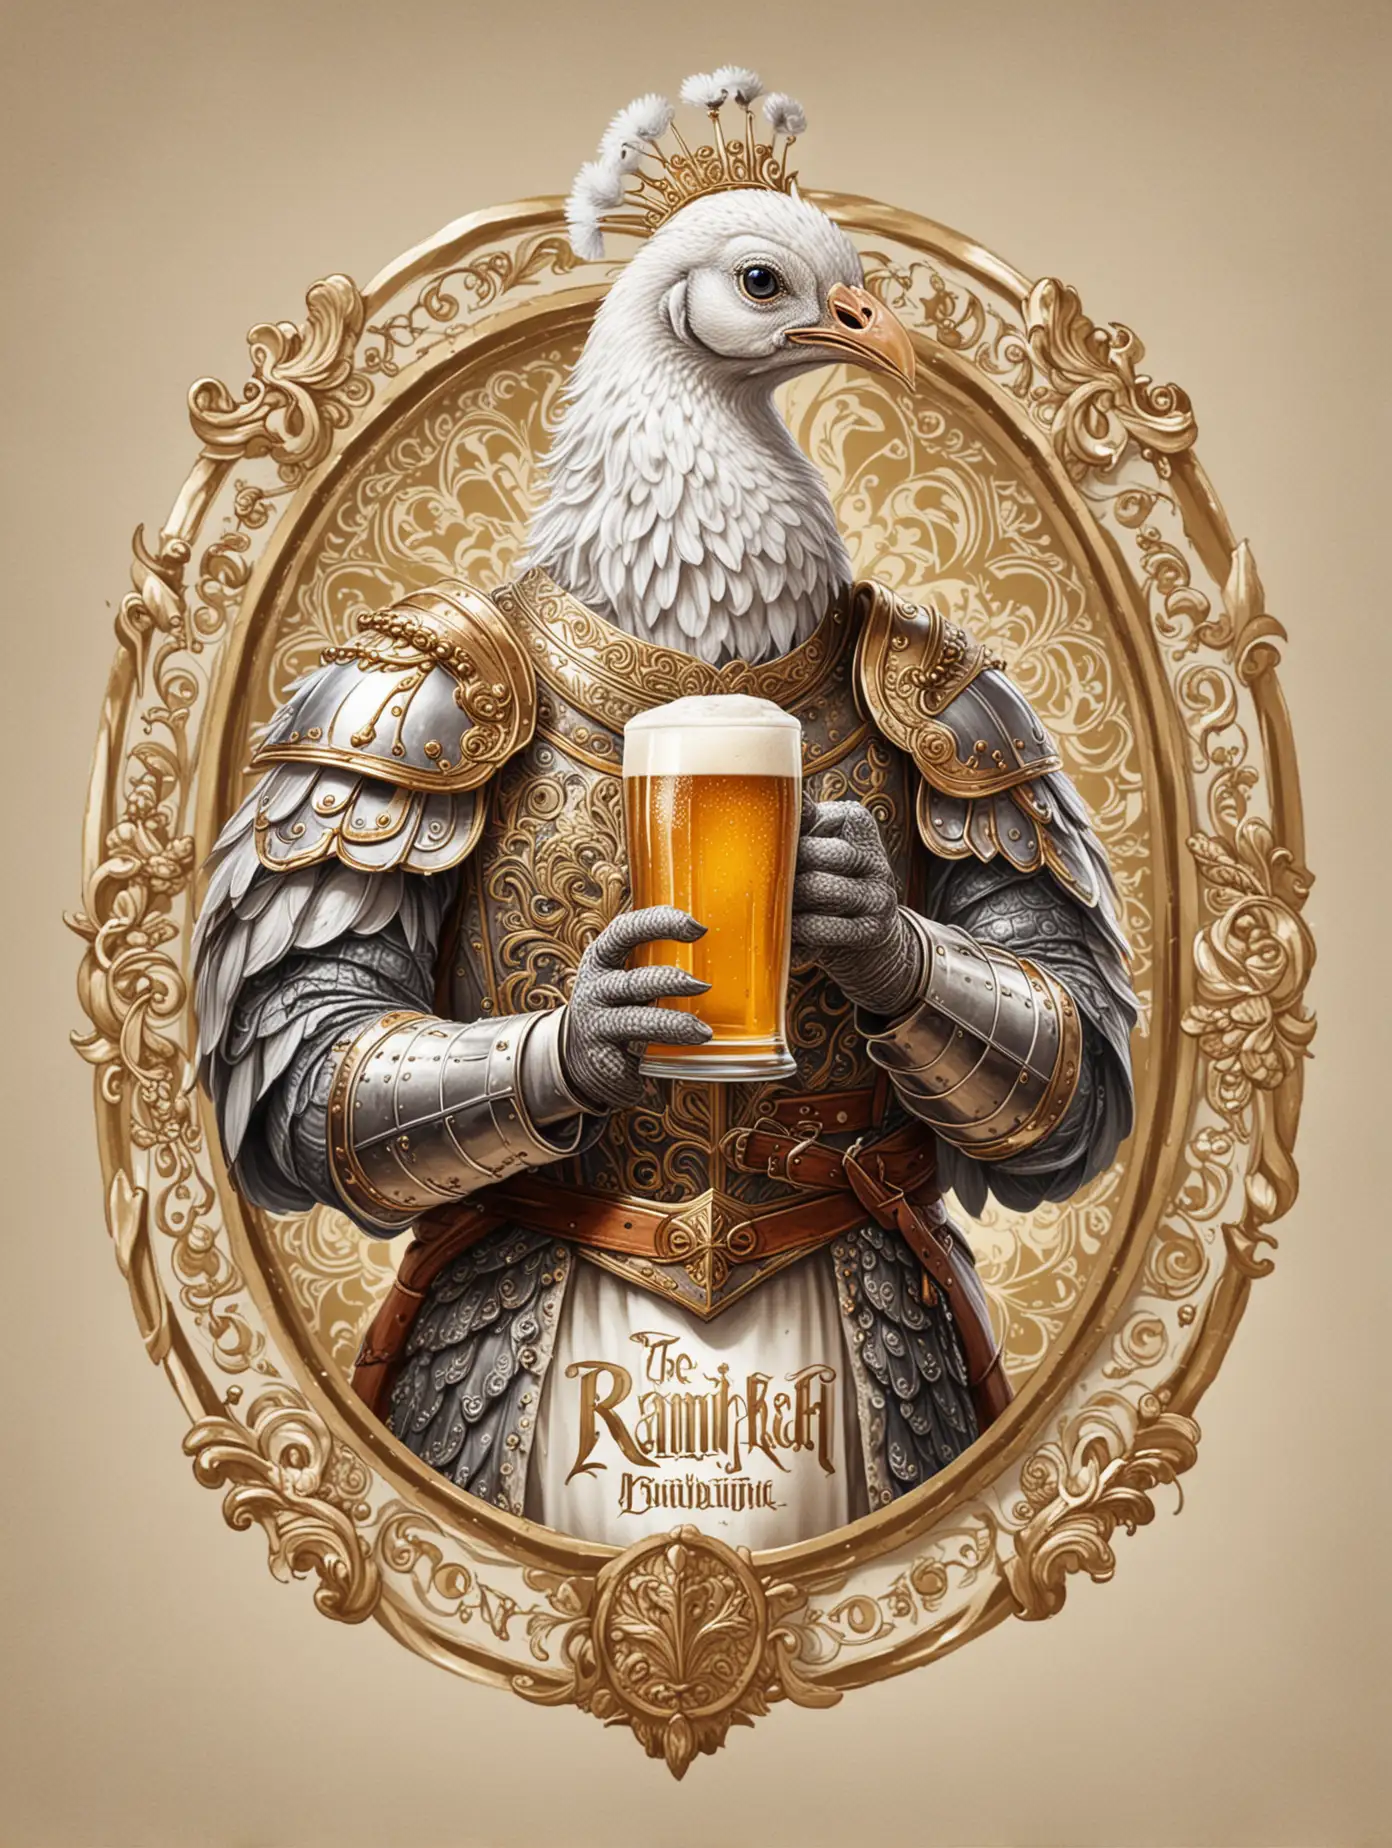 make me an logo from a white peacock dressed as a knight drinking beer. make me a beer label